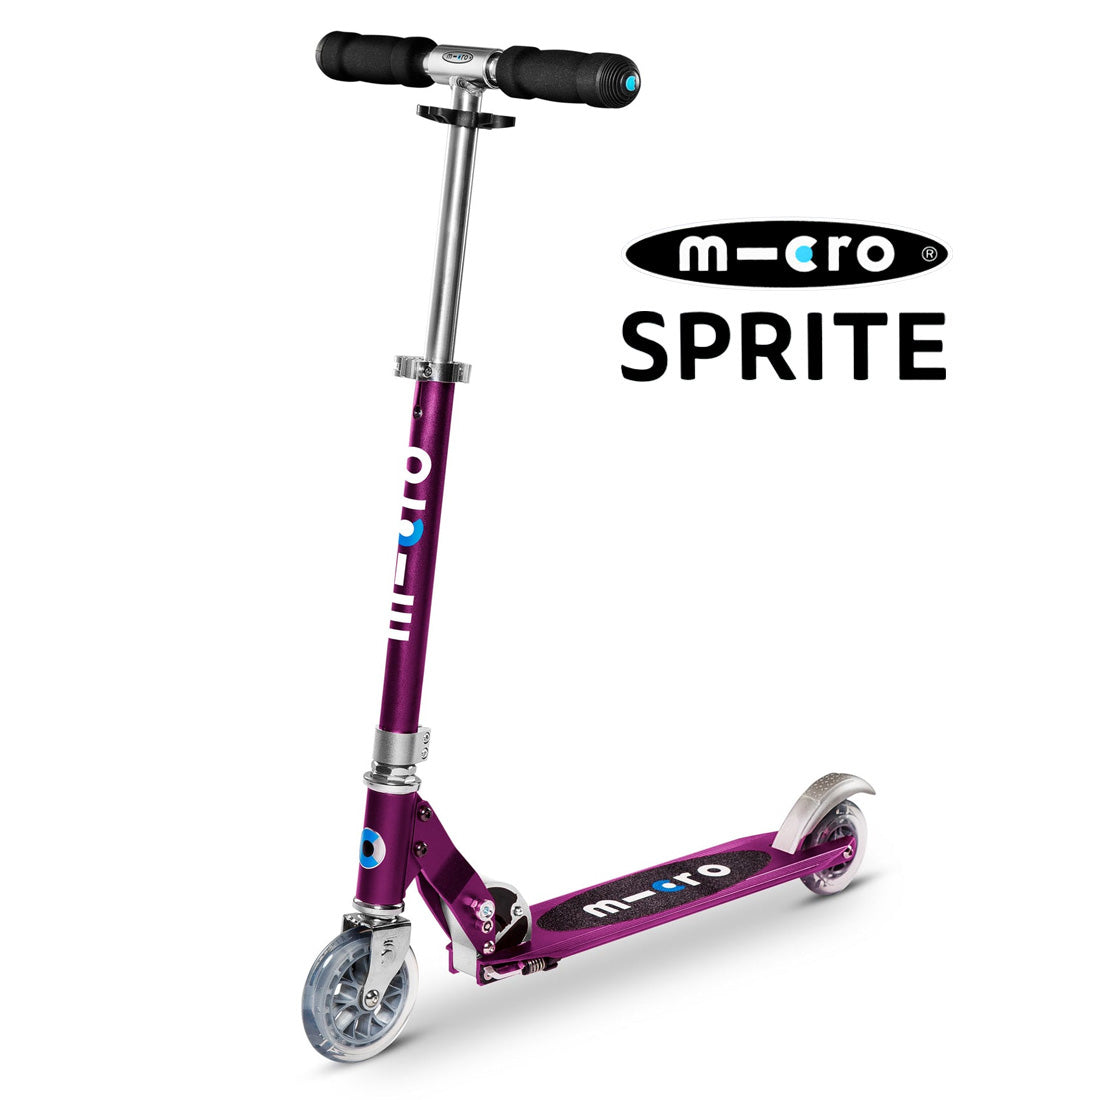 Micro Sprite Scooter - Purple Scooter Completes Rec